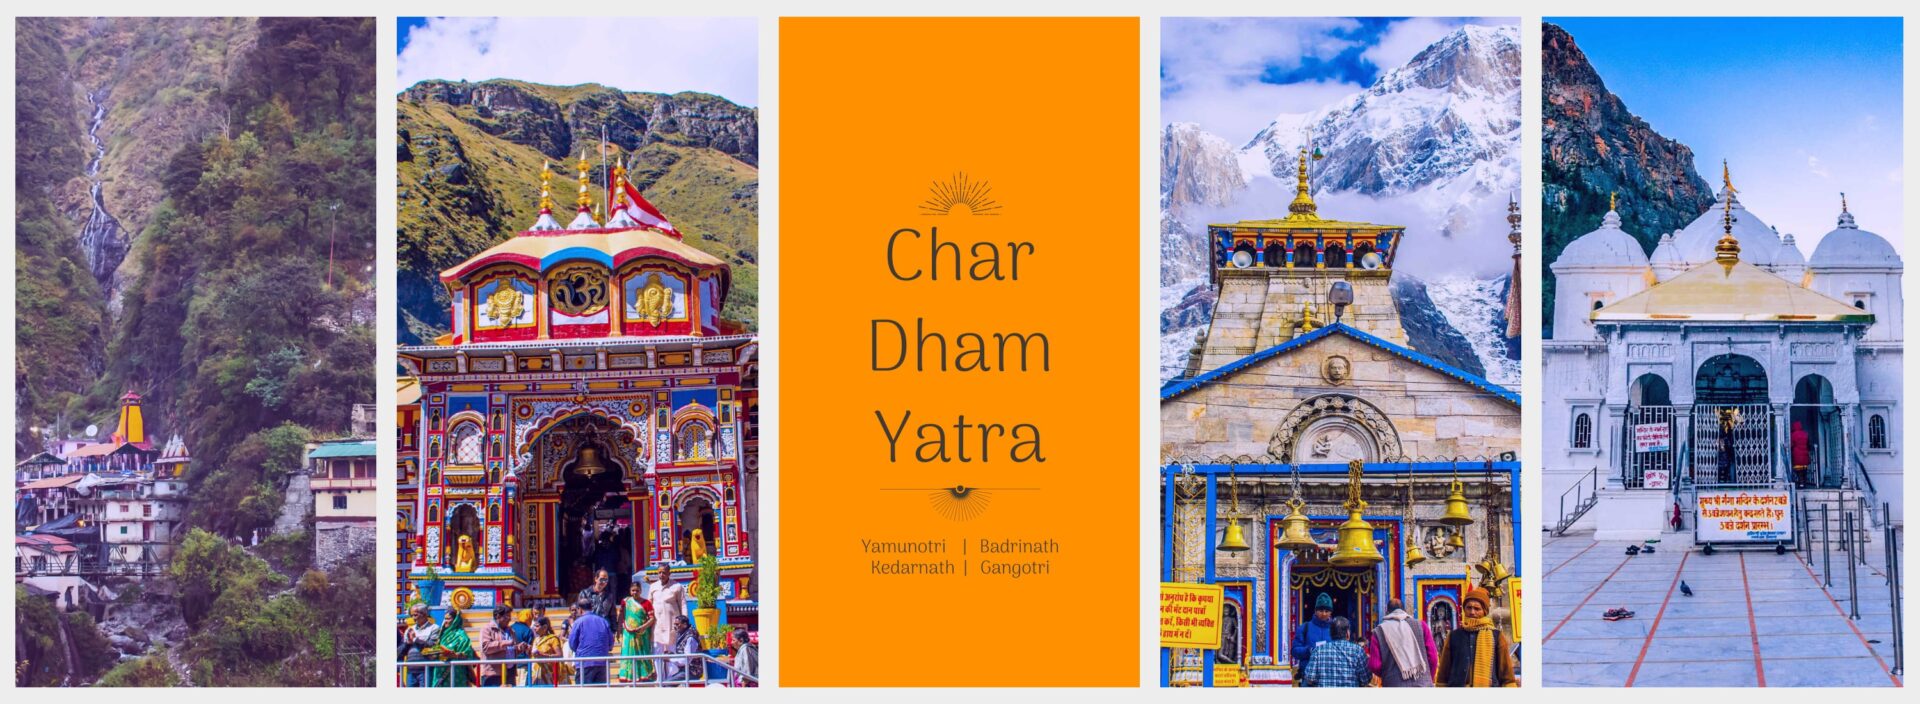 best time to visit char dham